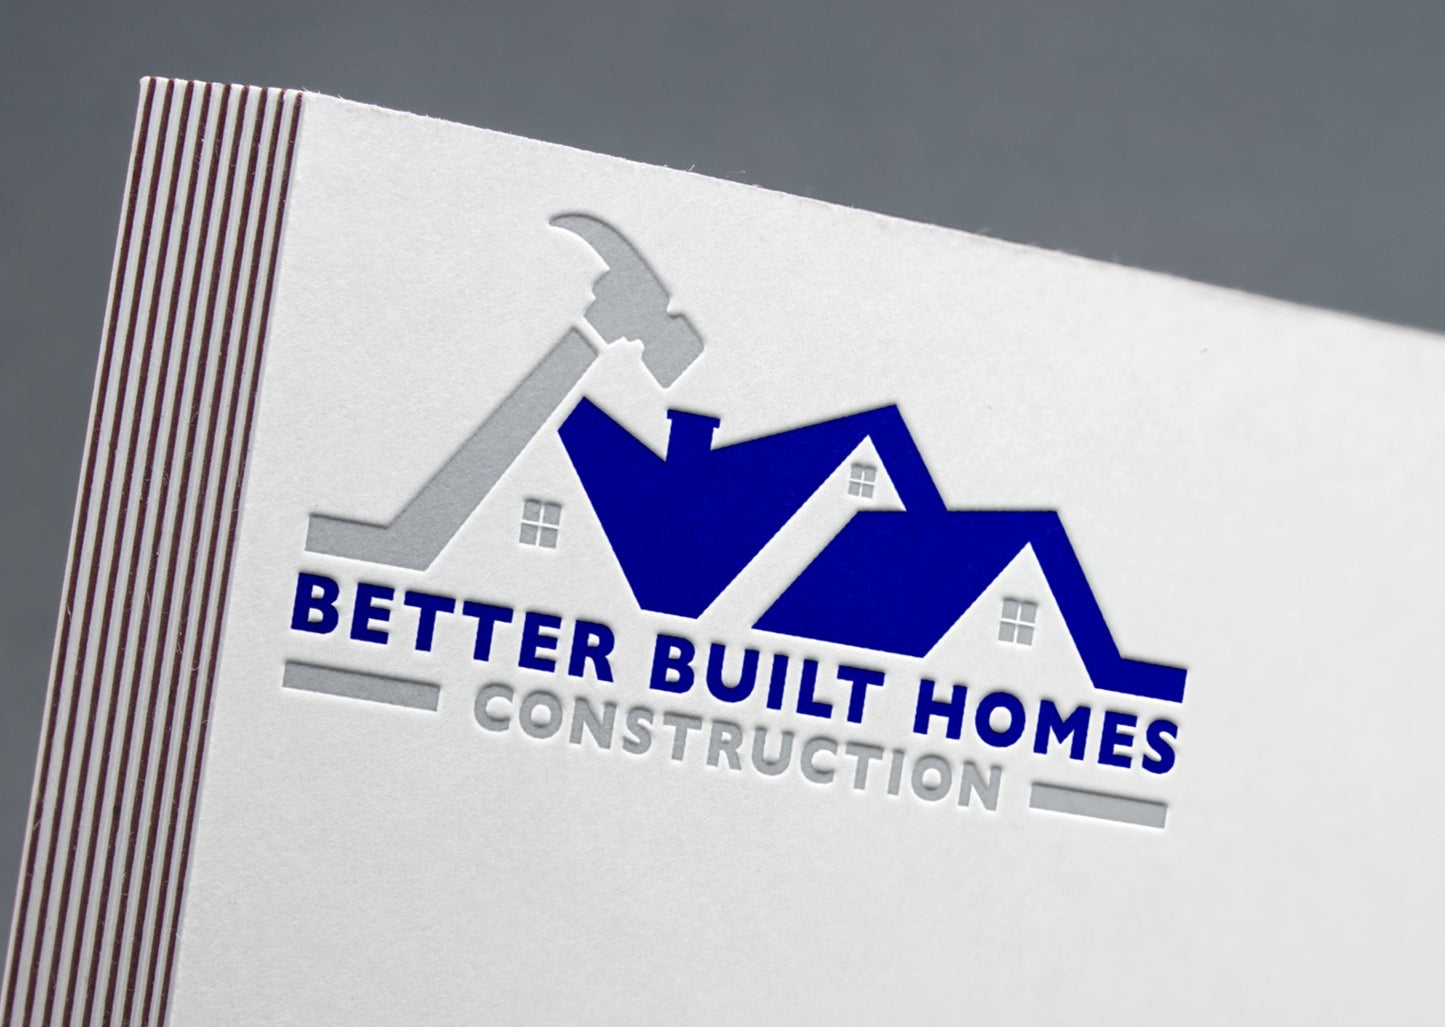 Construction Logo Design | Hammer Design | Roofing Business | Handyman Services | Construction Company | Architect | Roofer | Home Repair